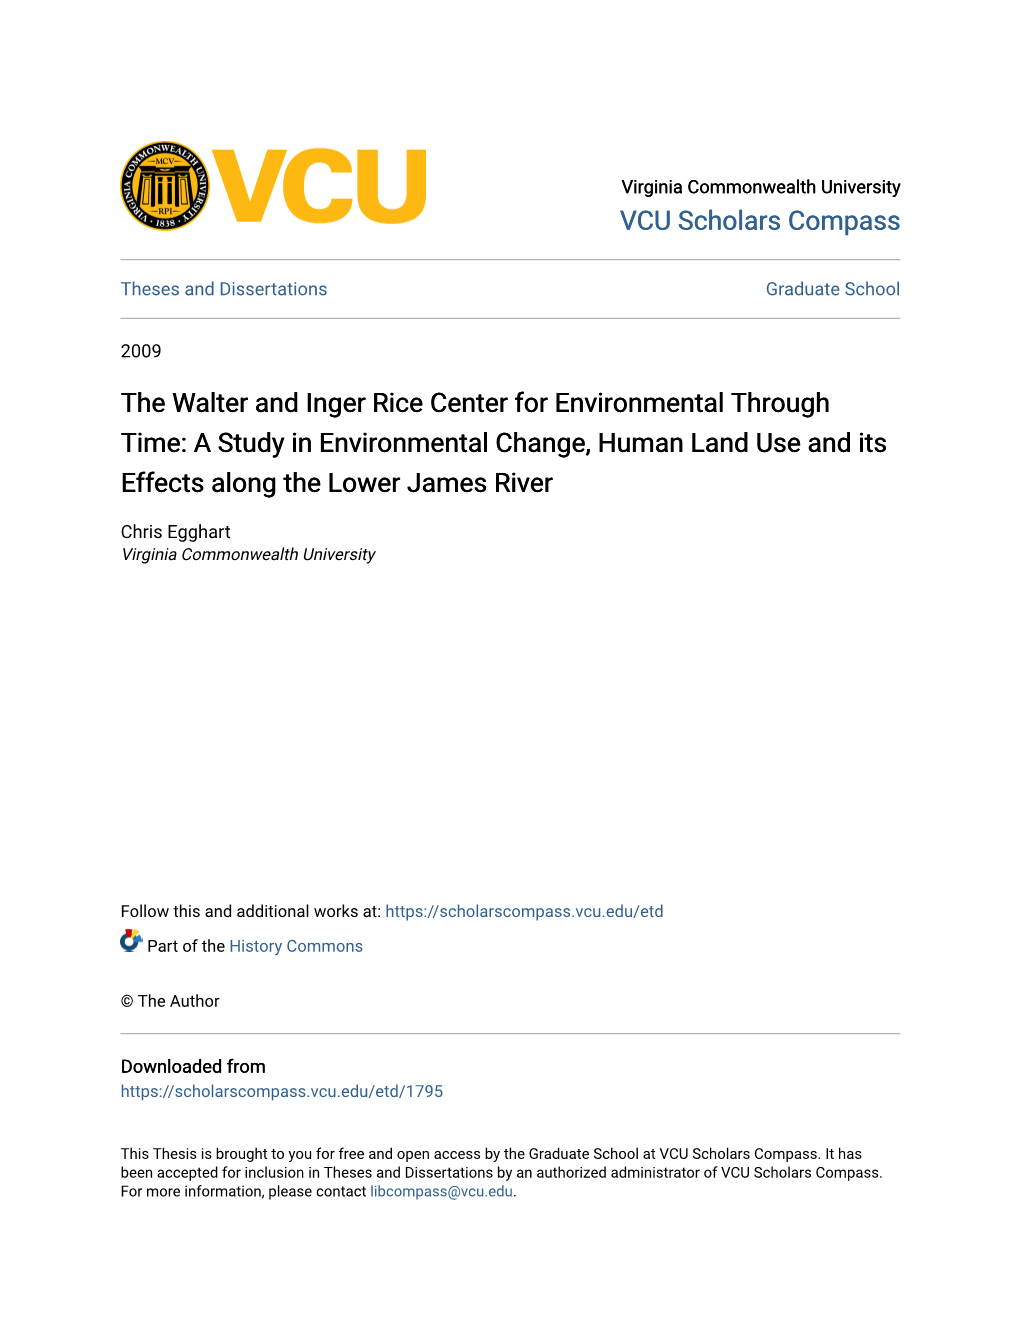 The Walter and Inger Rice Center for Environmental Through Time: a Study in Environmental Change, Human Land Use and Its Effects Along the Lower James River